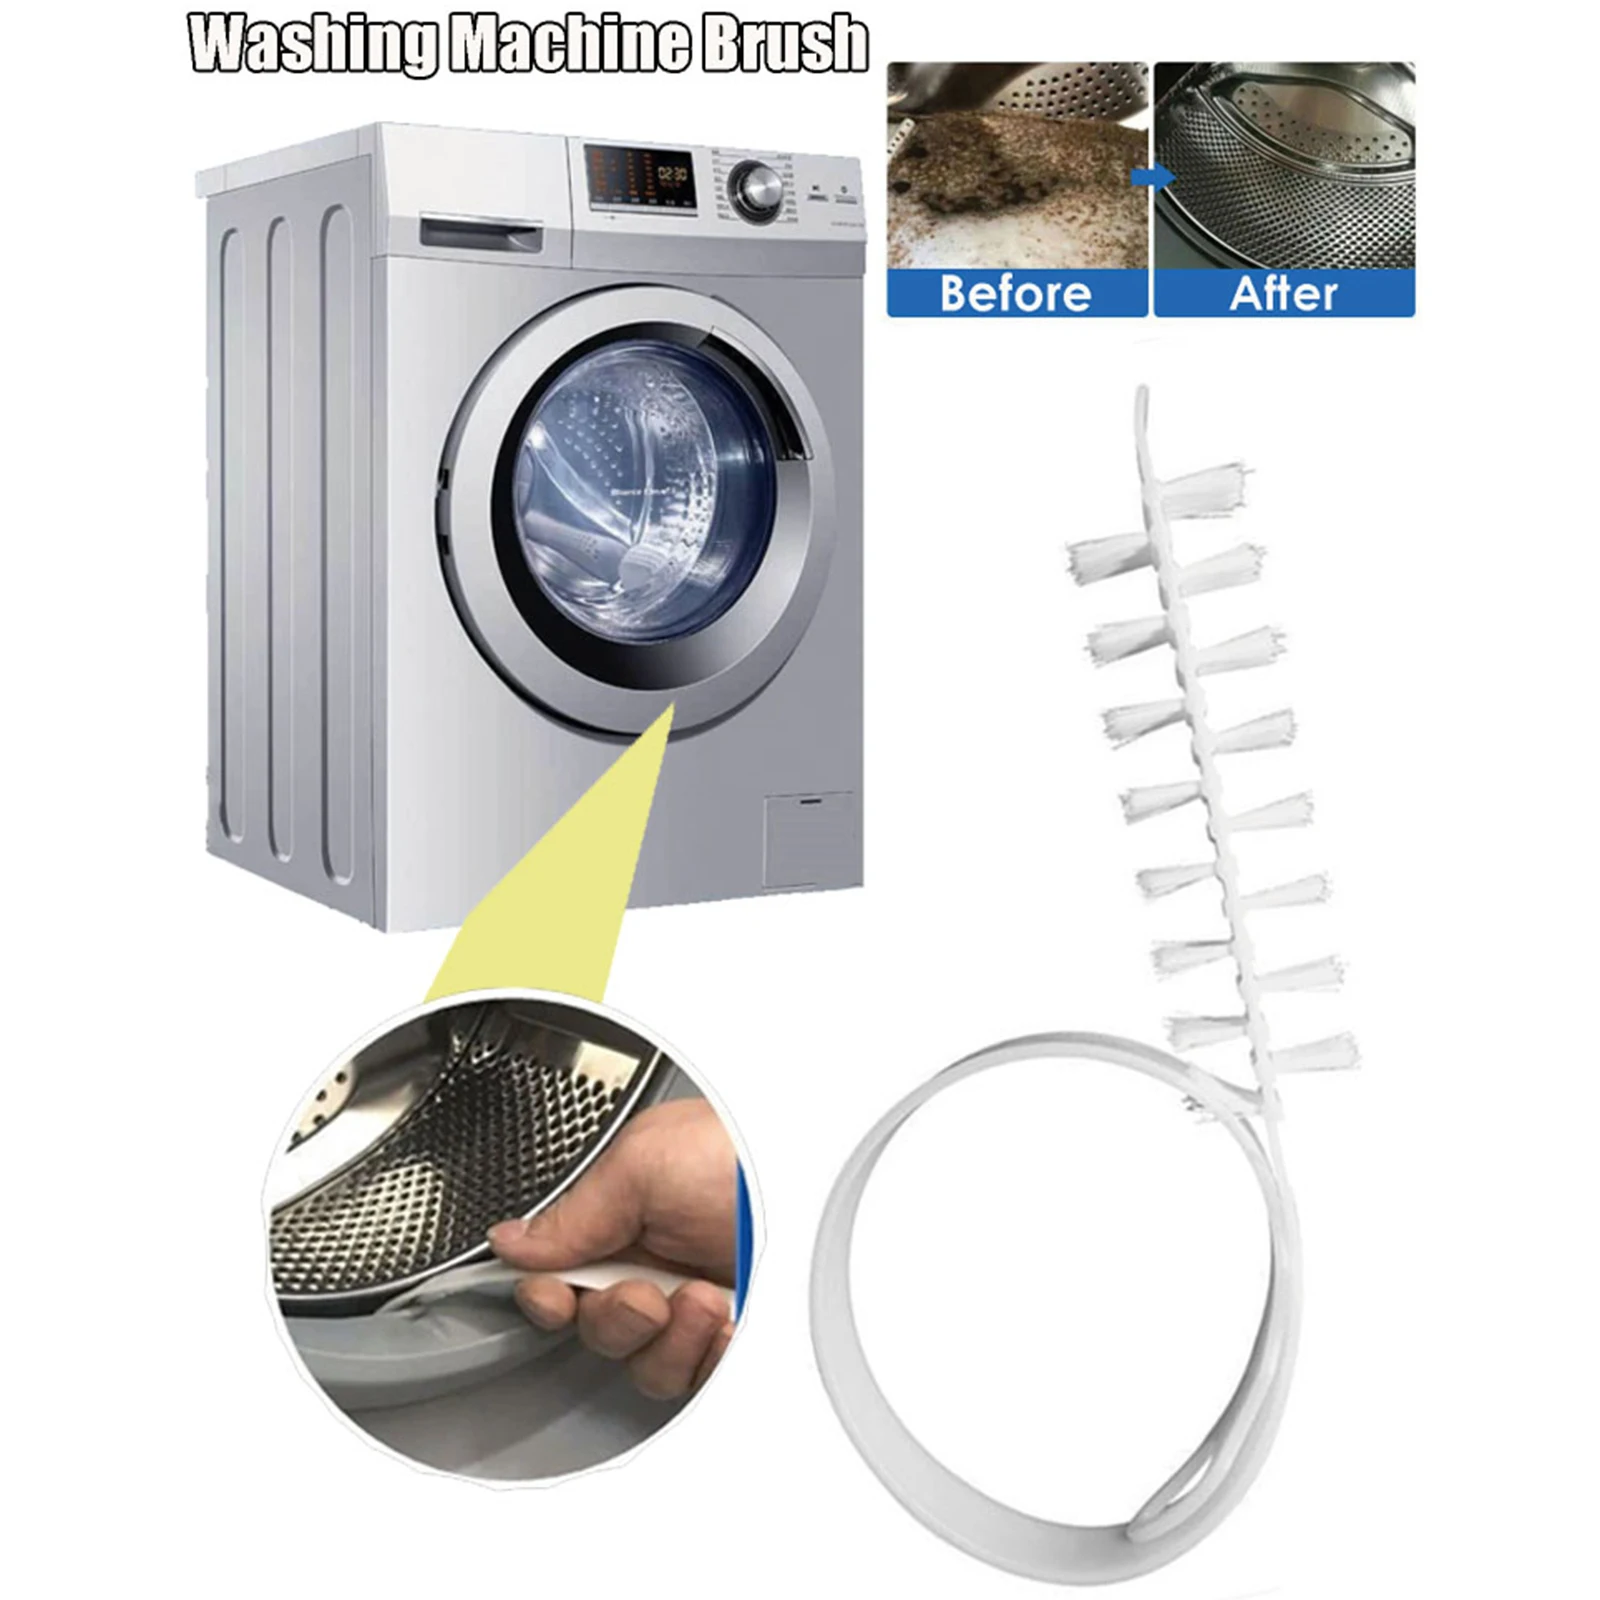 

Washing Machine Cleaner Brush Remove Mycete Cleaning Intensity Decontamination Descaling Flexible Cleaner Brush Dirt Detergent